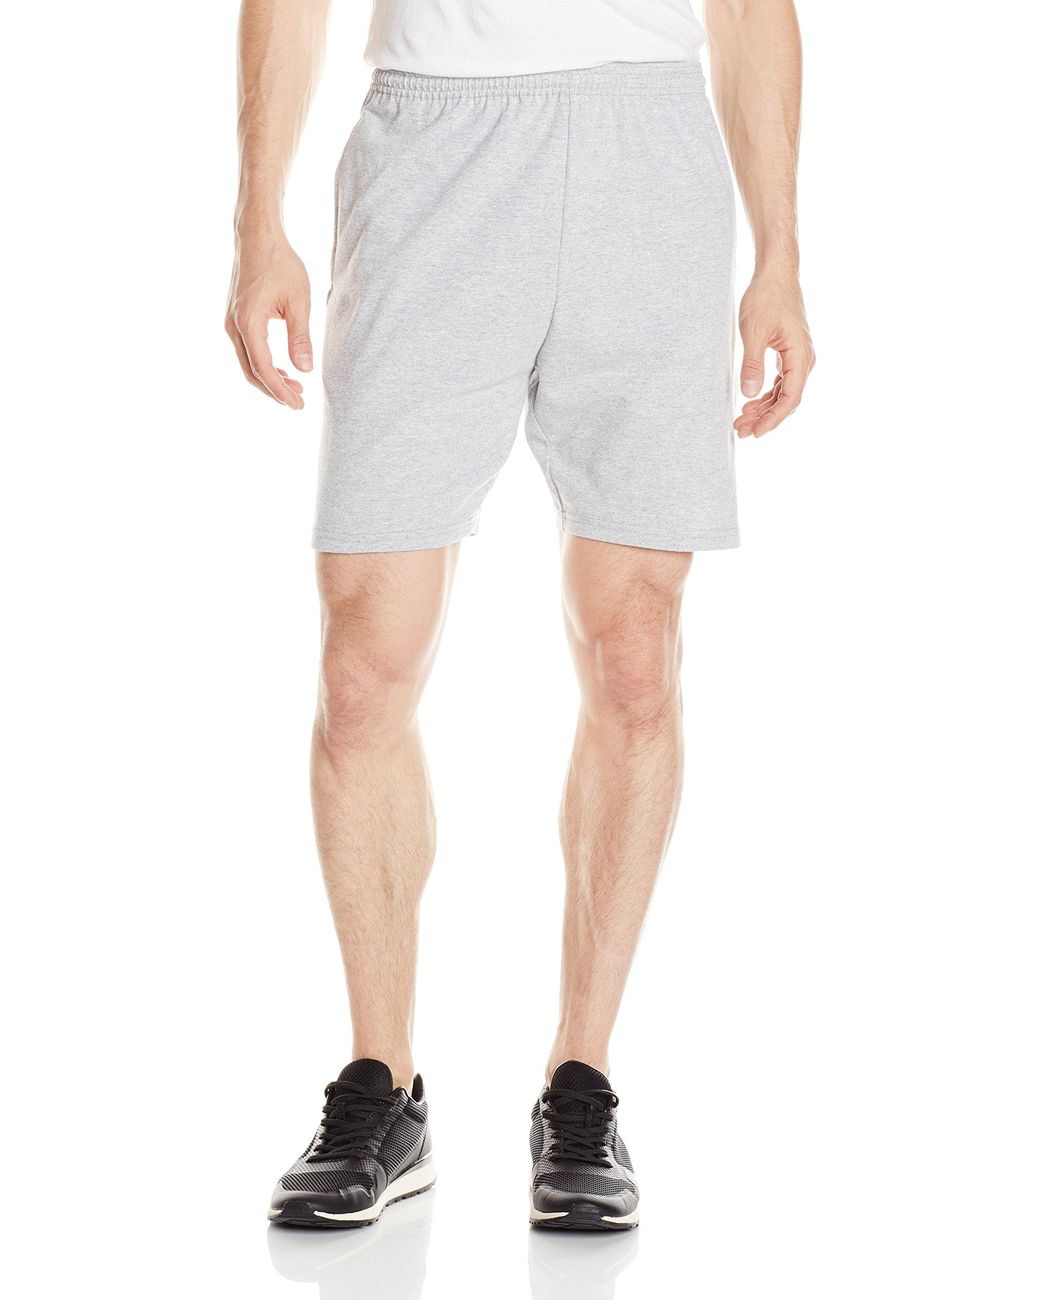 Hanes Cotton Jersey Short With Pockets in Light Steel (Gray) for Men ...